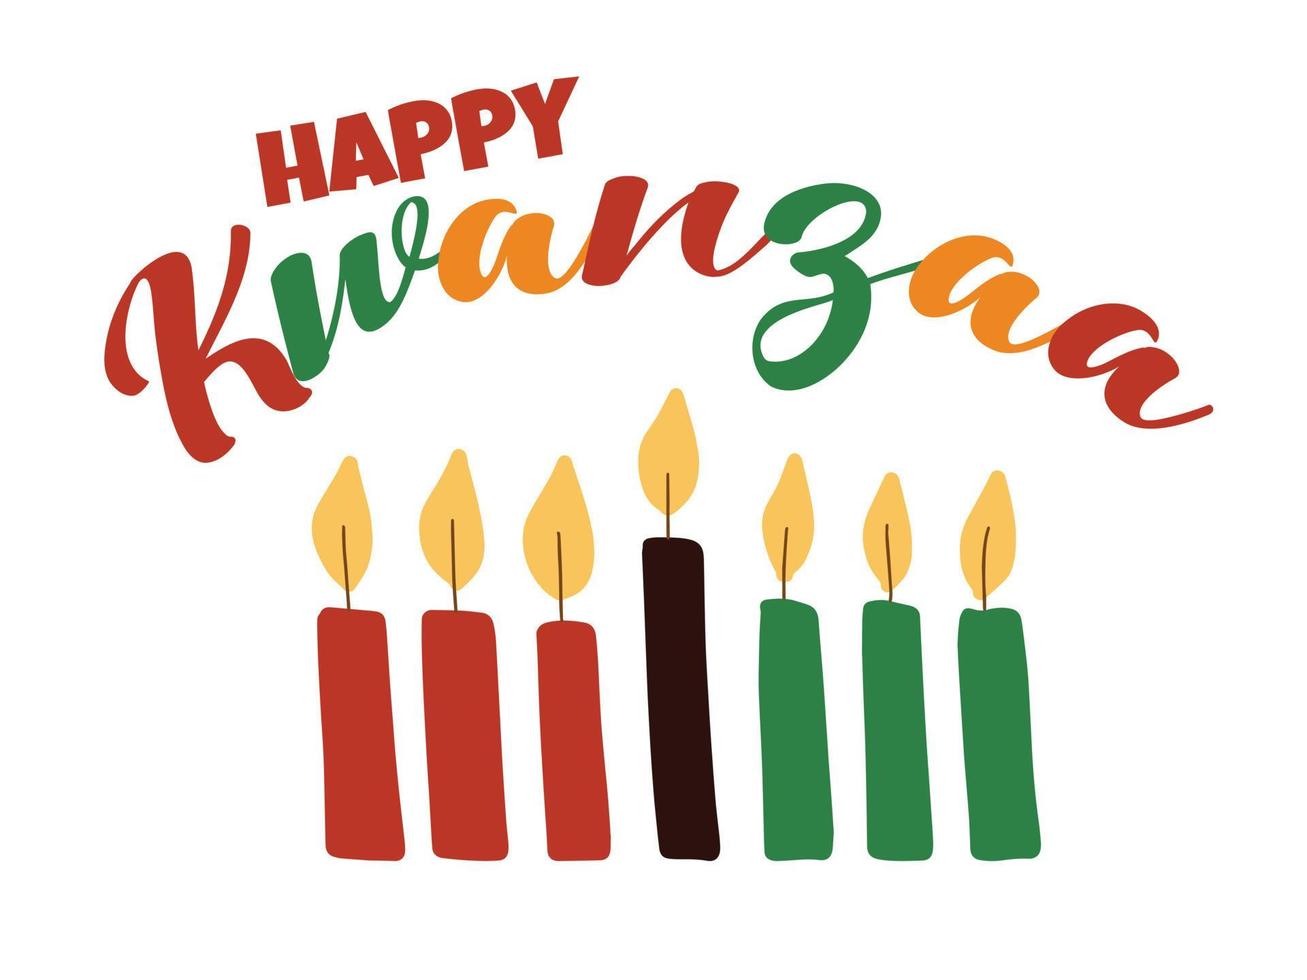 Happy Kwanzaa - banner with colorful script lettering and hand drawn simple kinara candles. African American heritage celebration festival greeting card vector